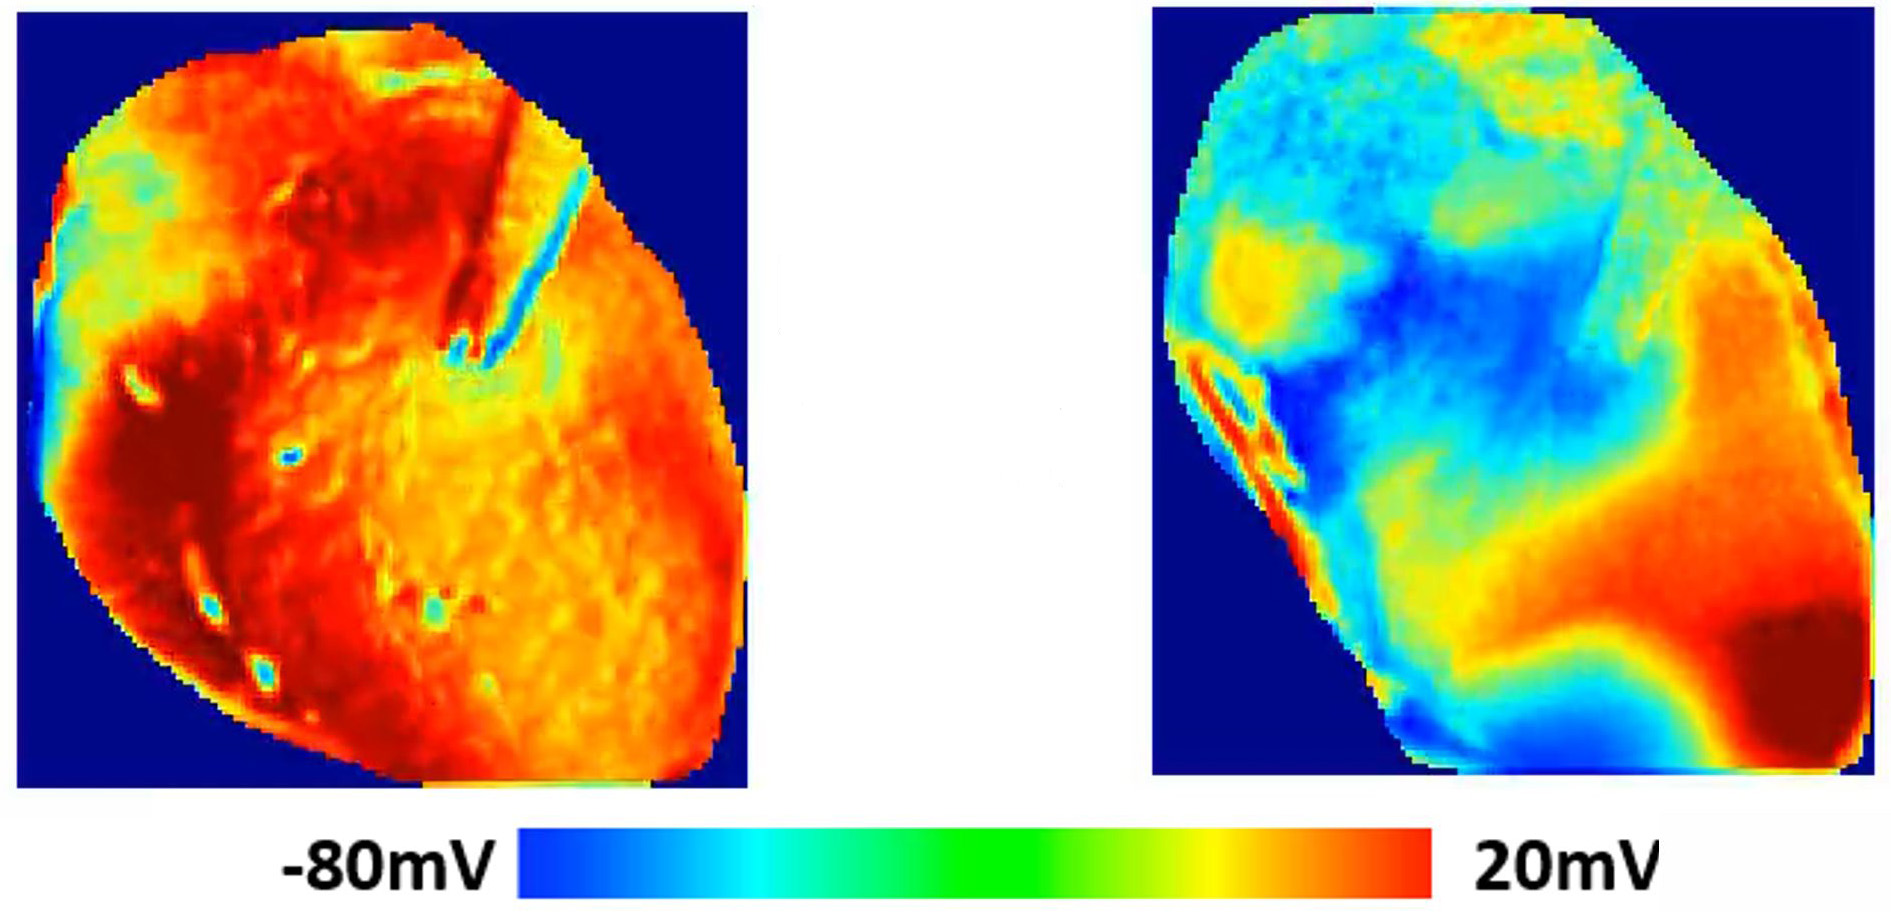 Images show the voltage surface on a rabbit heart with and without HCQ. Without the drug (left) the electrical activation spreads homogeneously, while with HCQ, waves propagate unevenly, generating complex spatiotemporal patterns and arrhythmias.